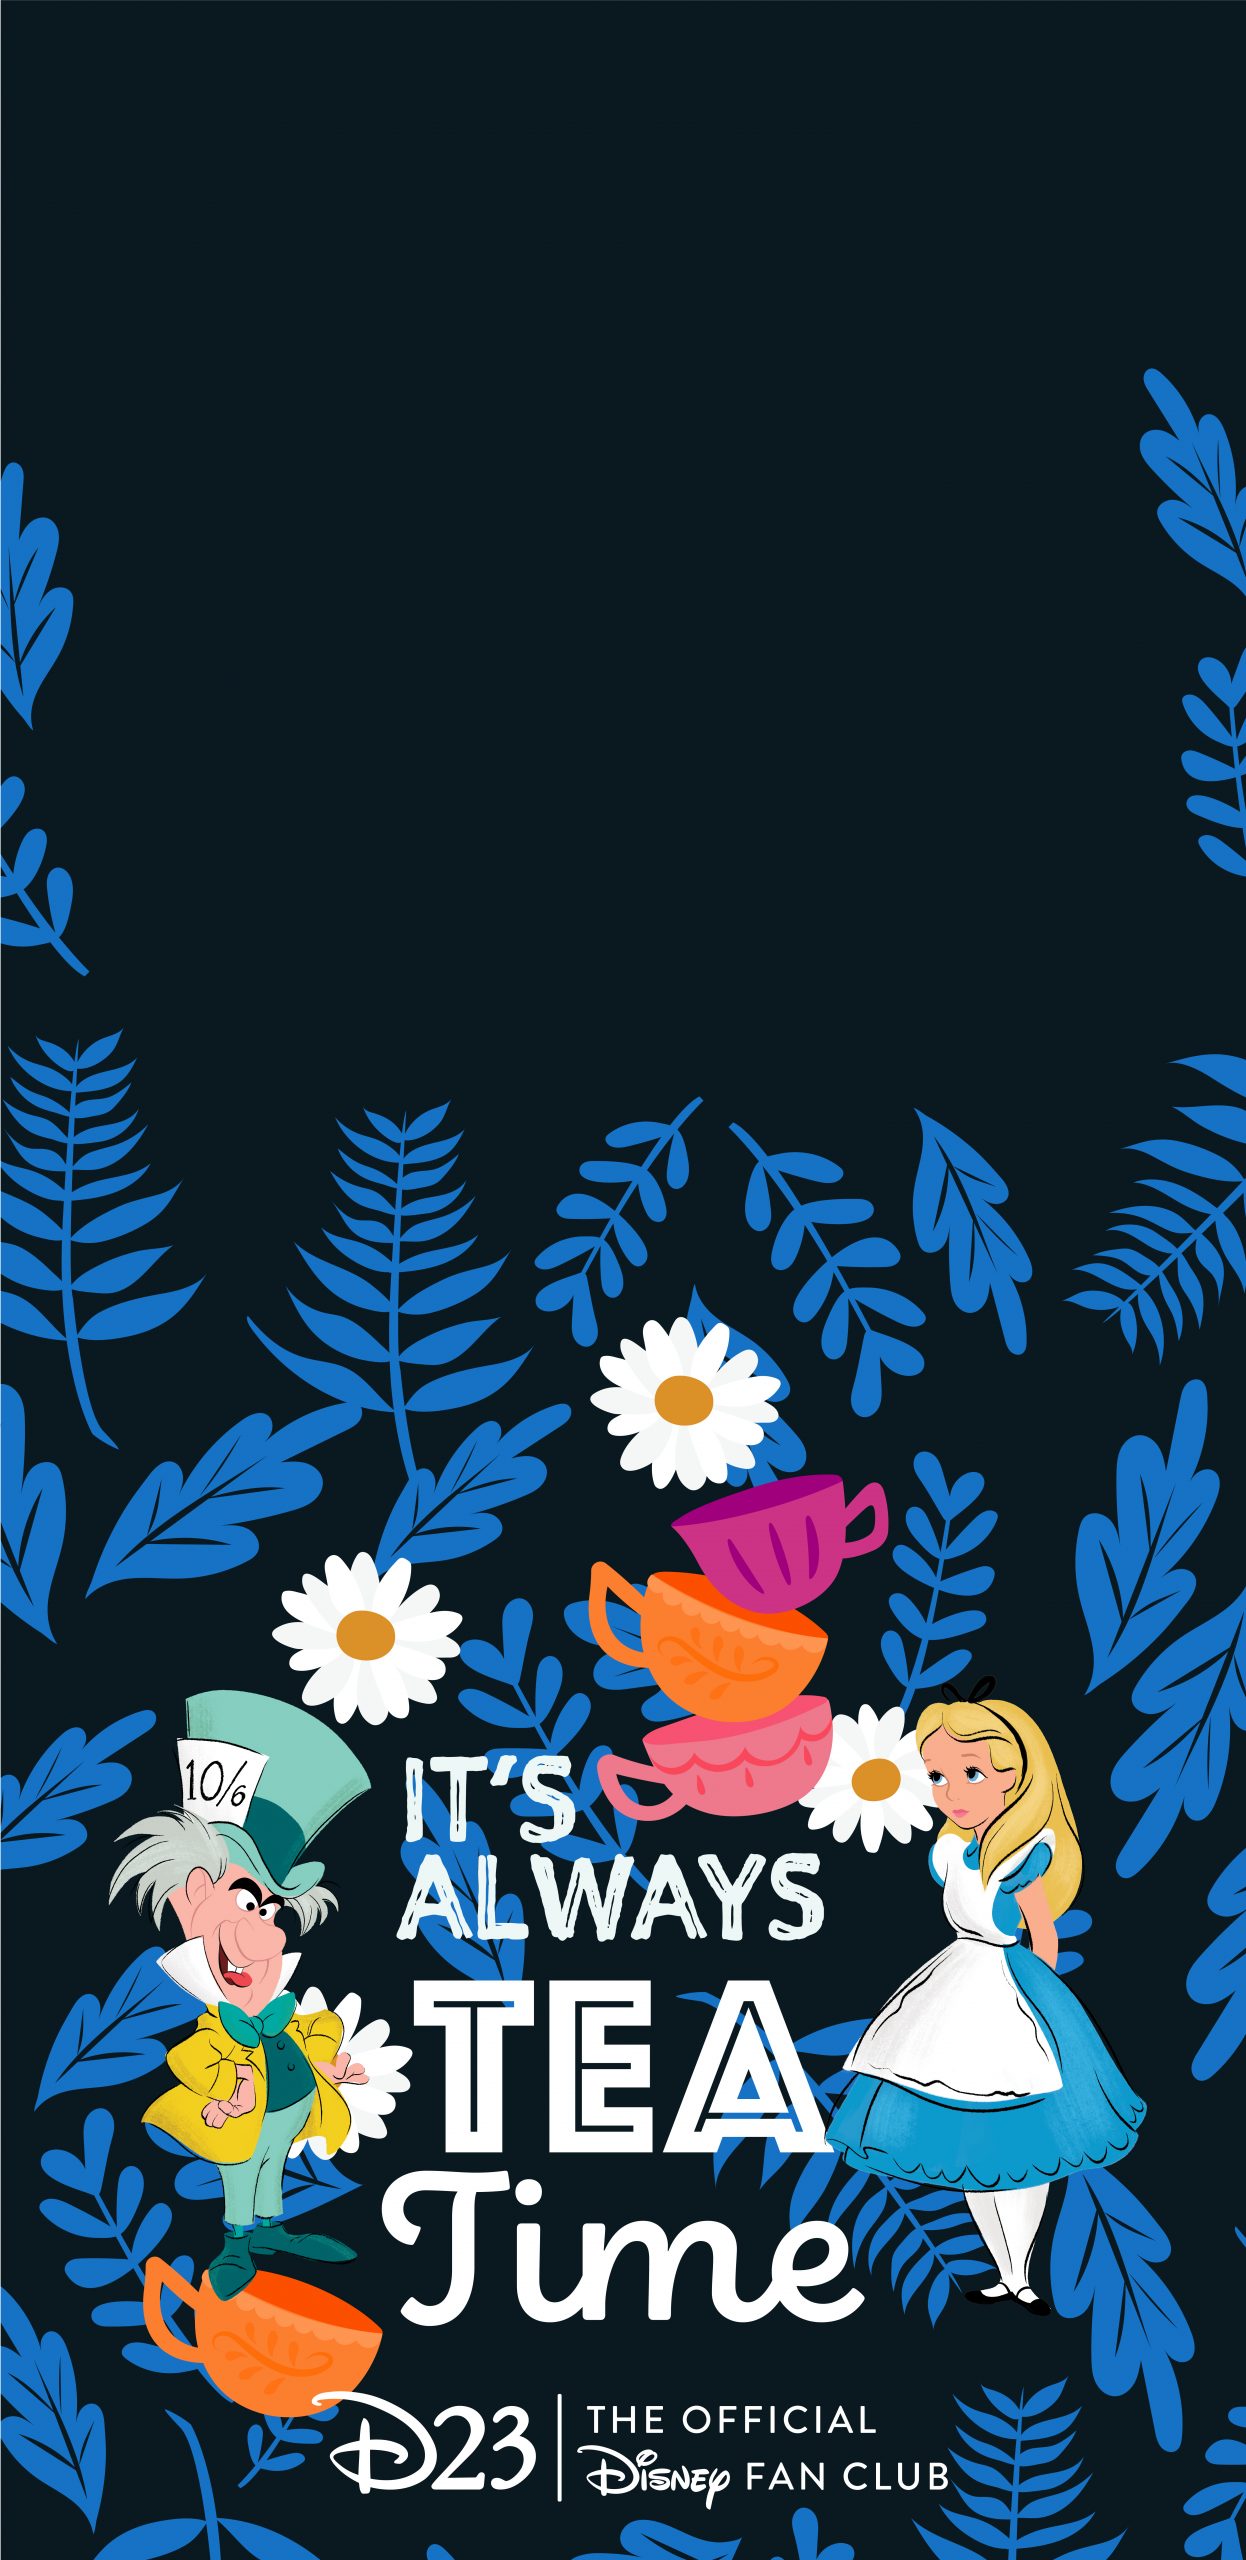 Make Your Phone a Wonderland with These Wallpaper Celebrating 70 Years of Alice in Wonderland